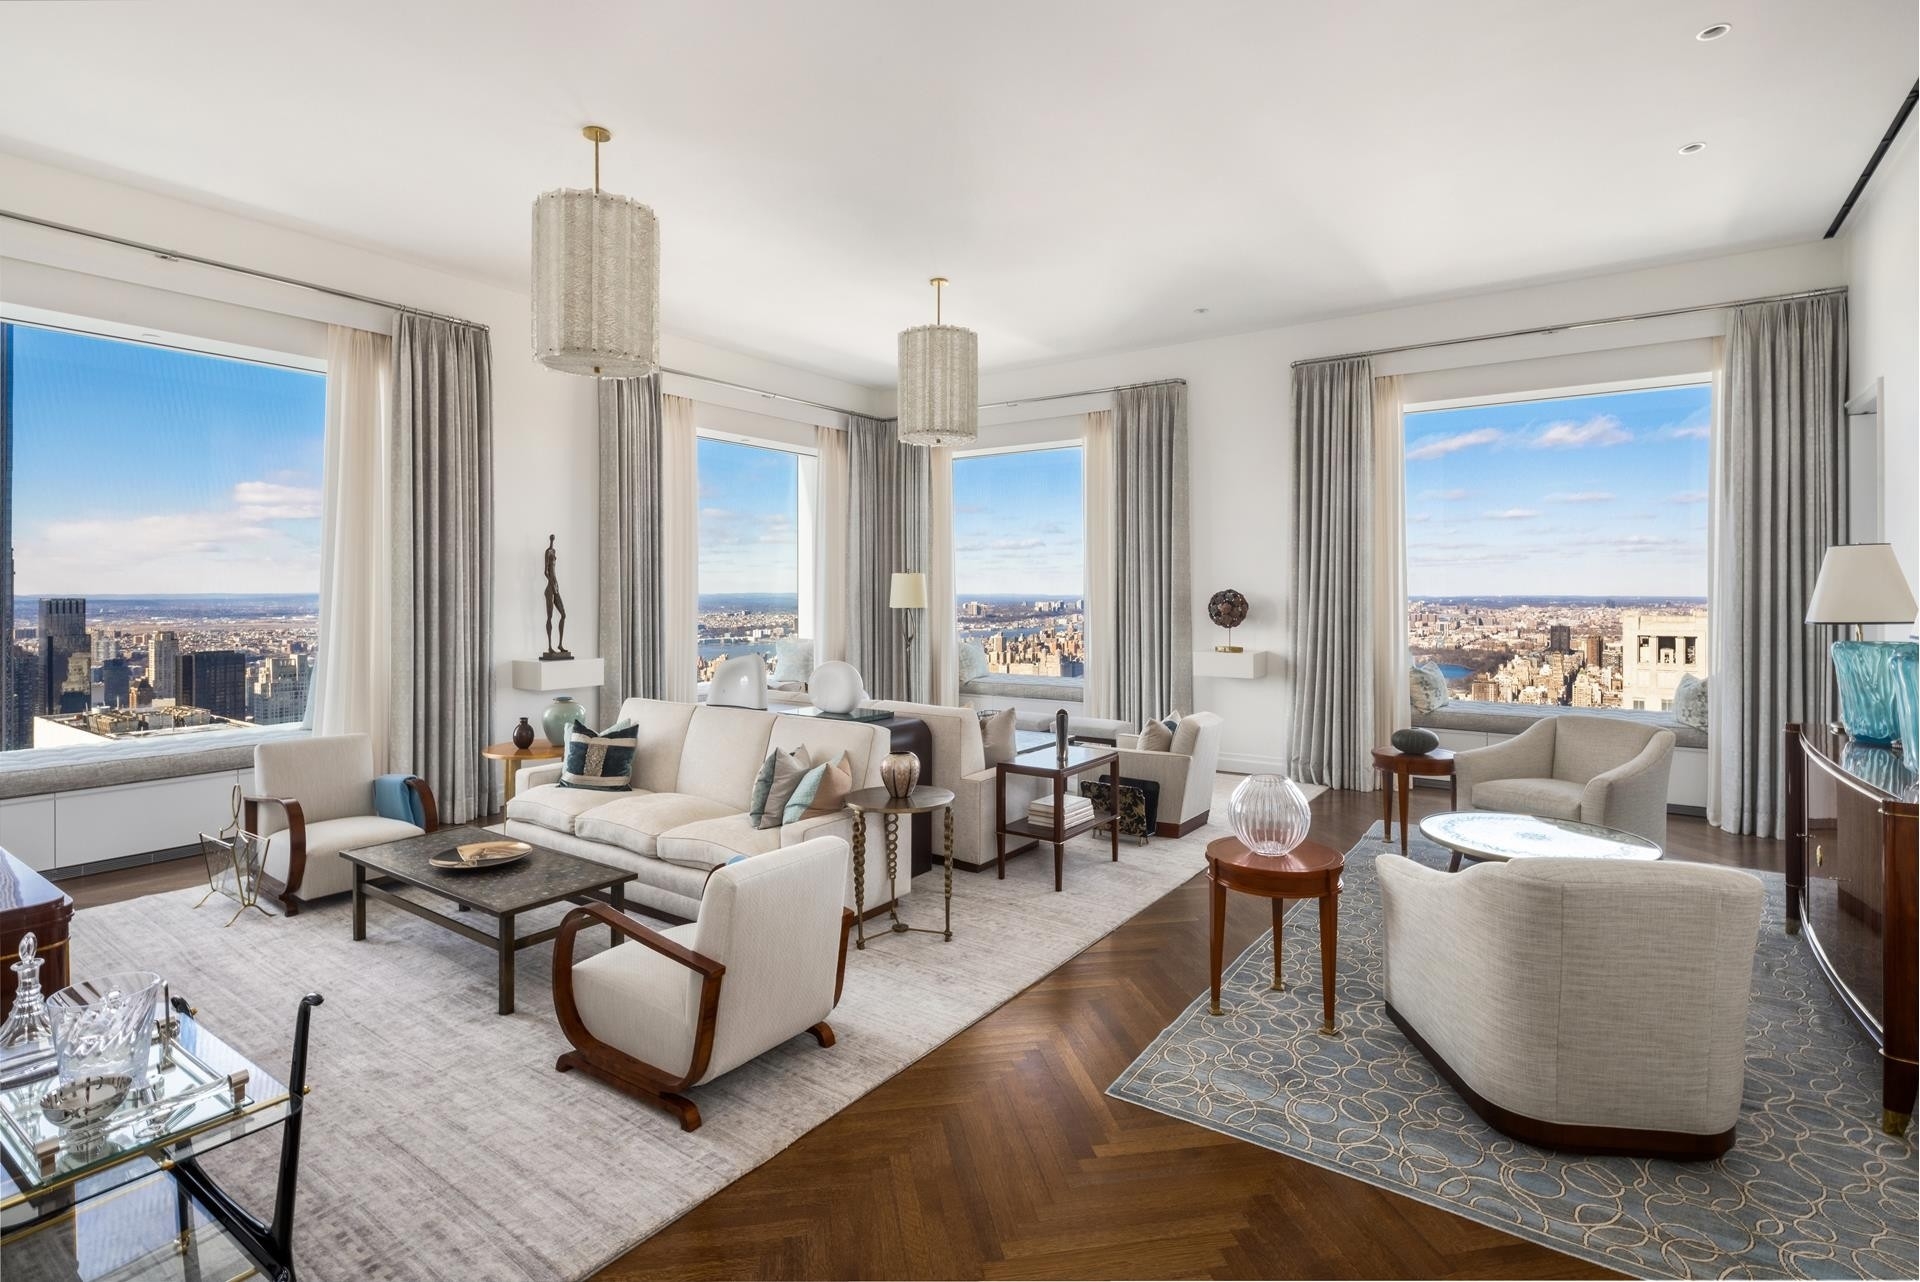 Property at 432 PARK AVE, 63B Midtown East, New York, New York 10022